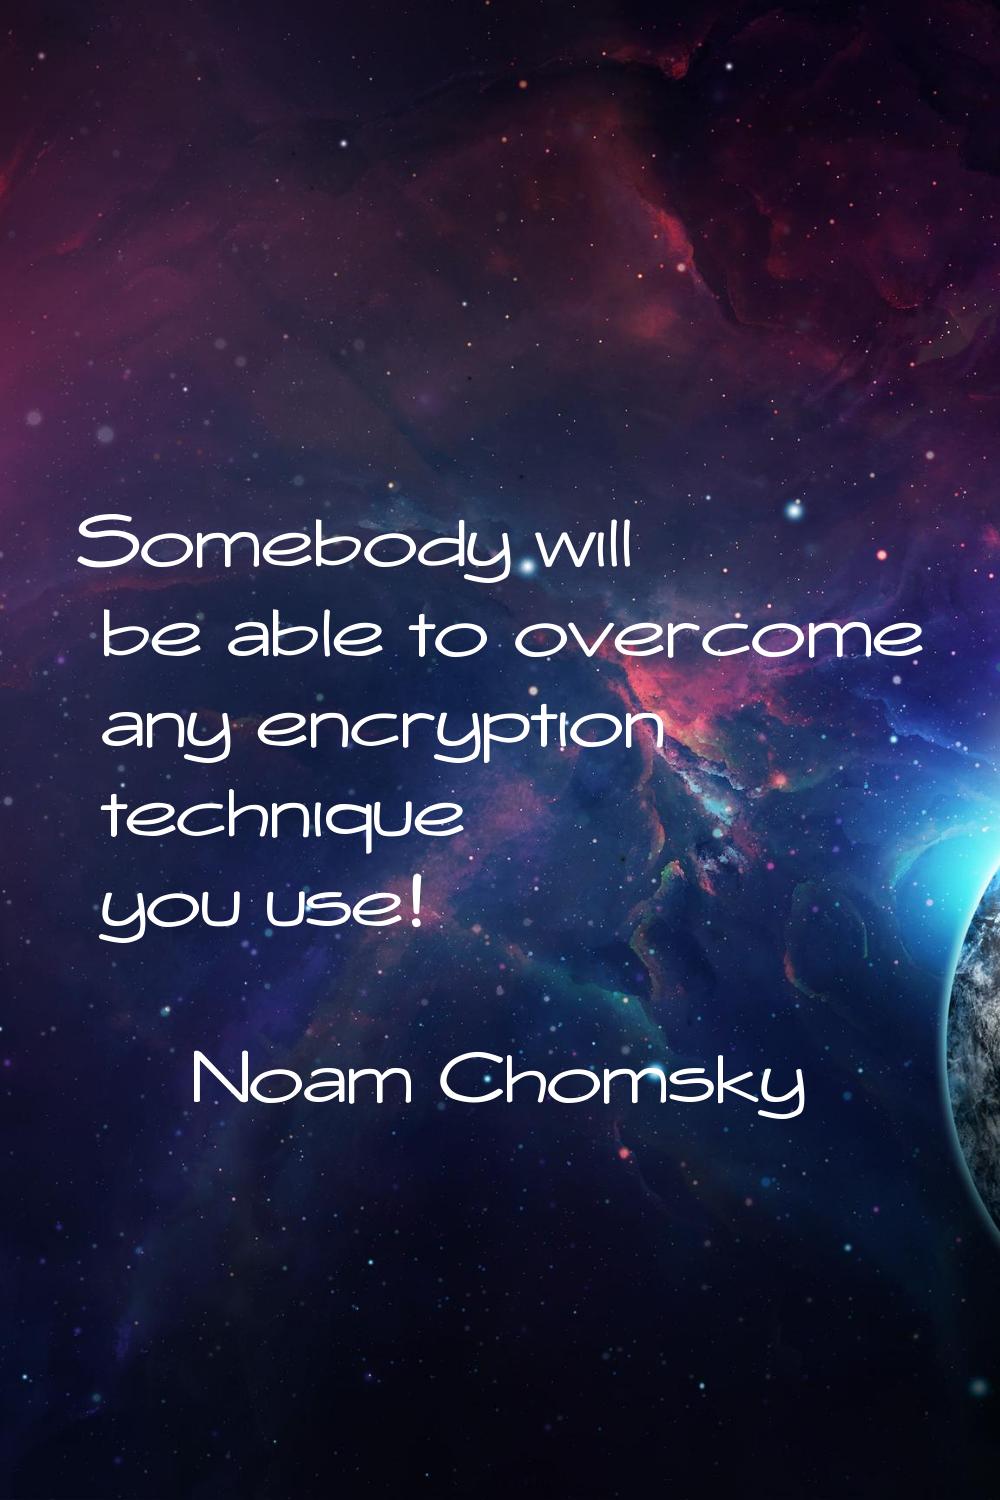 Somebody will be able to overcome any encryption technique you use!